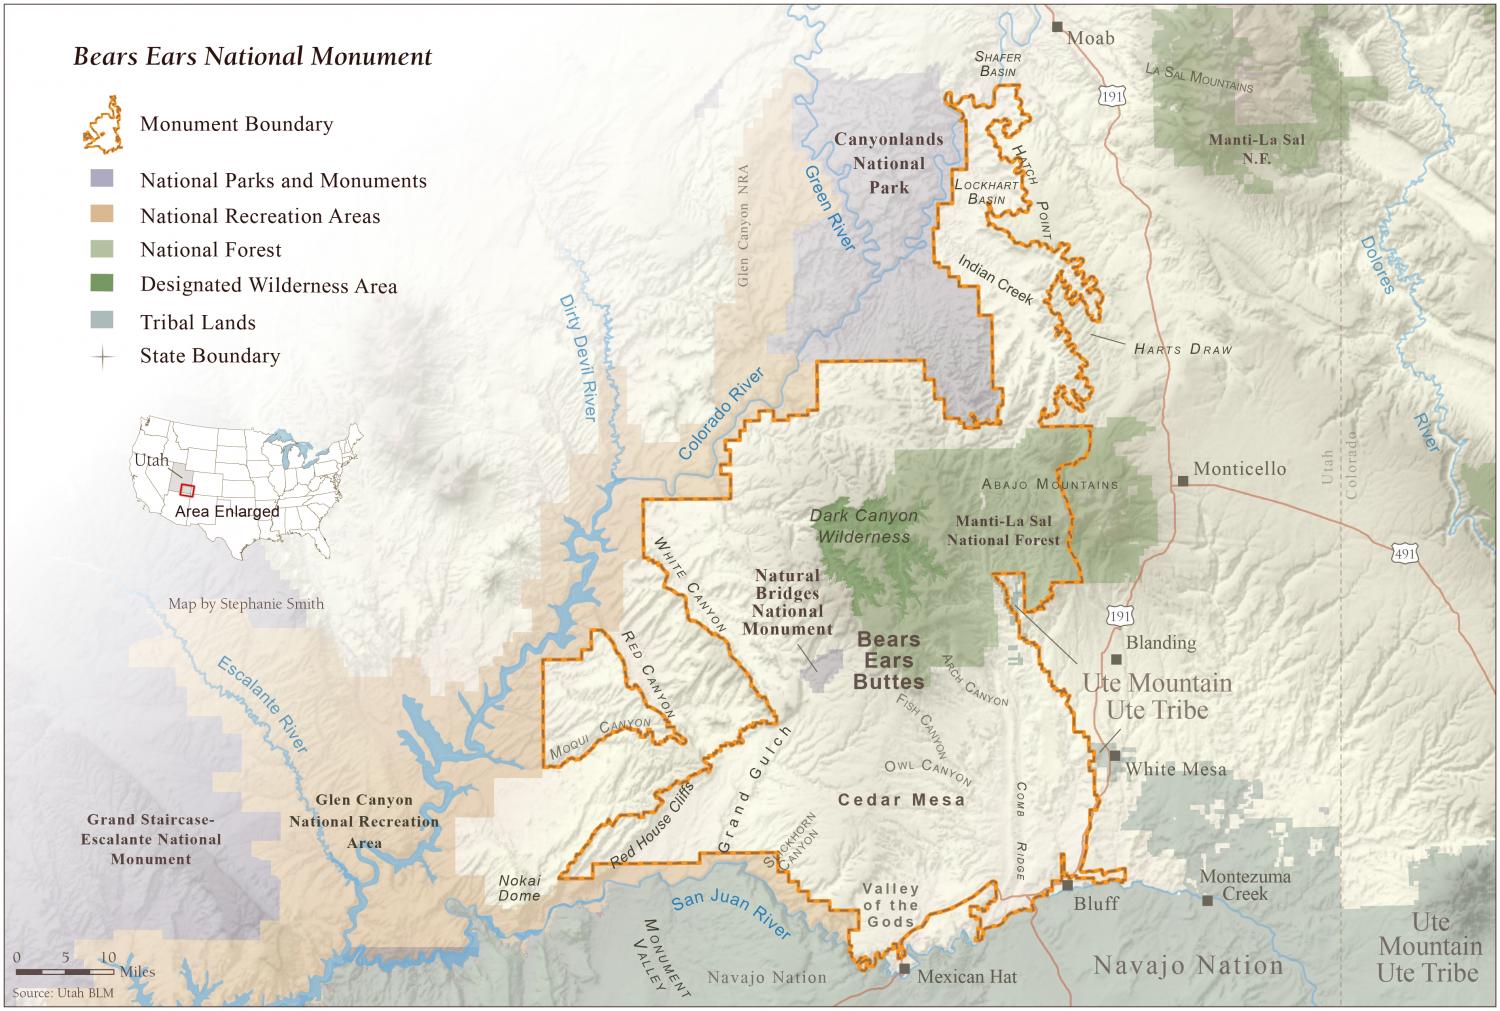 Map of the Bears Ears National Monument